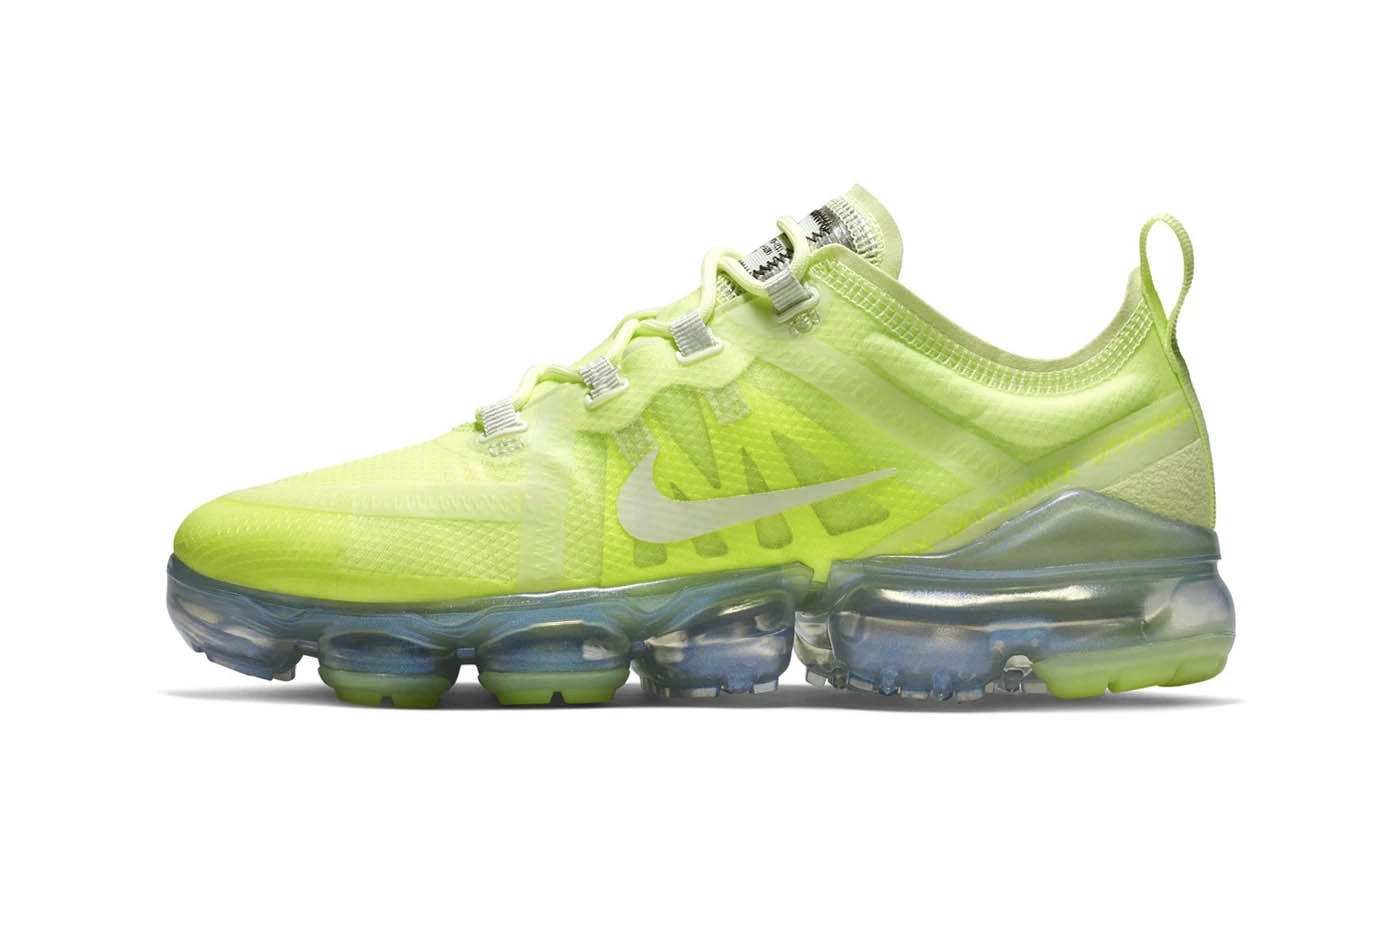 Nike's New Air VaporMax 2019 in "Volt Glow" Yellow Green 